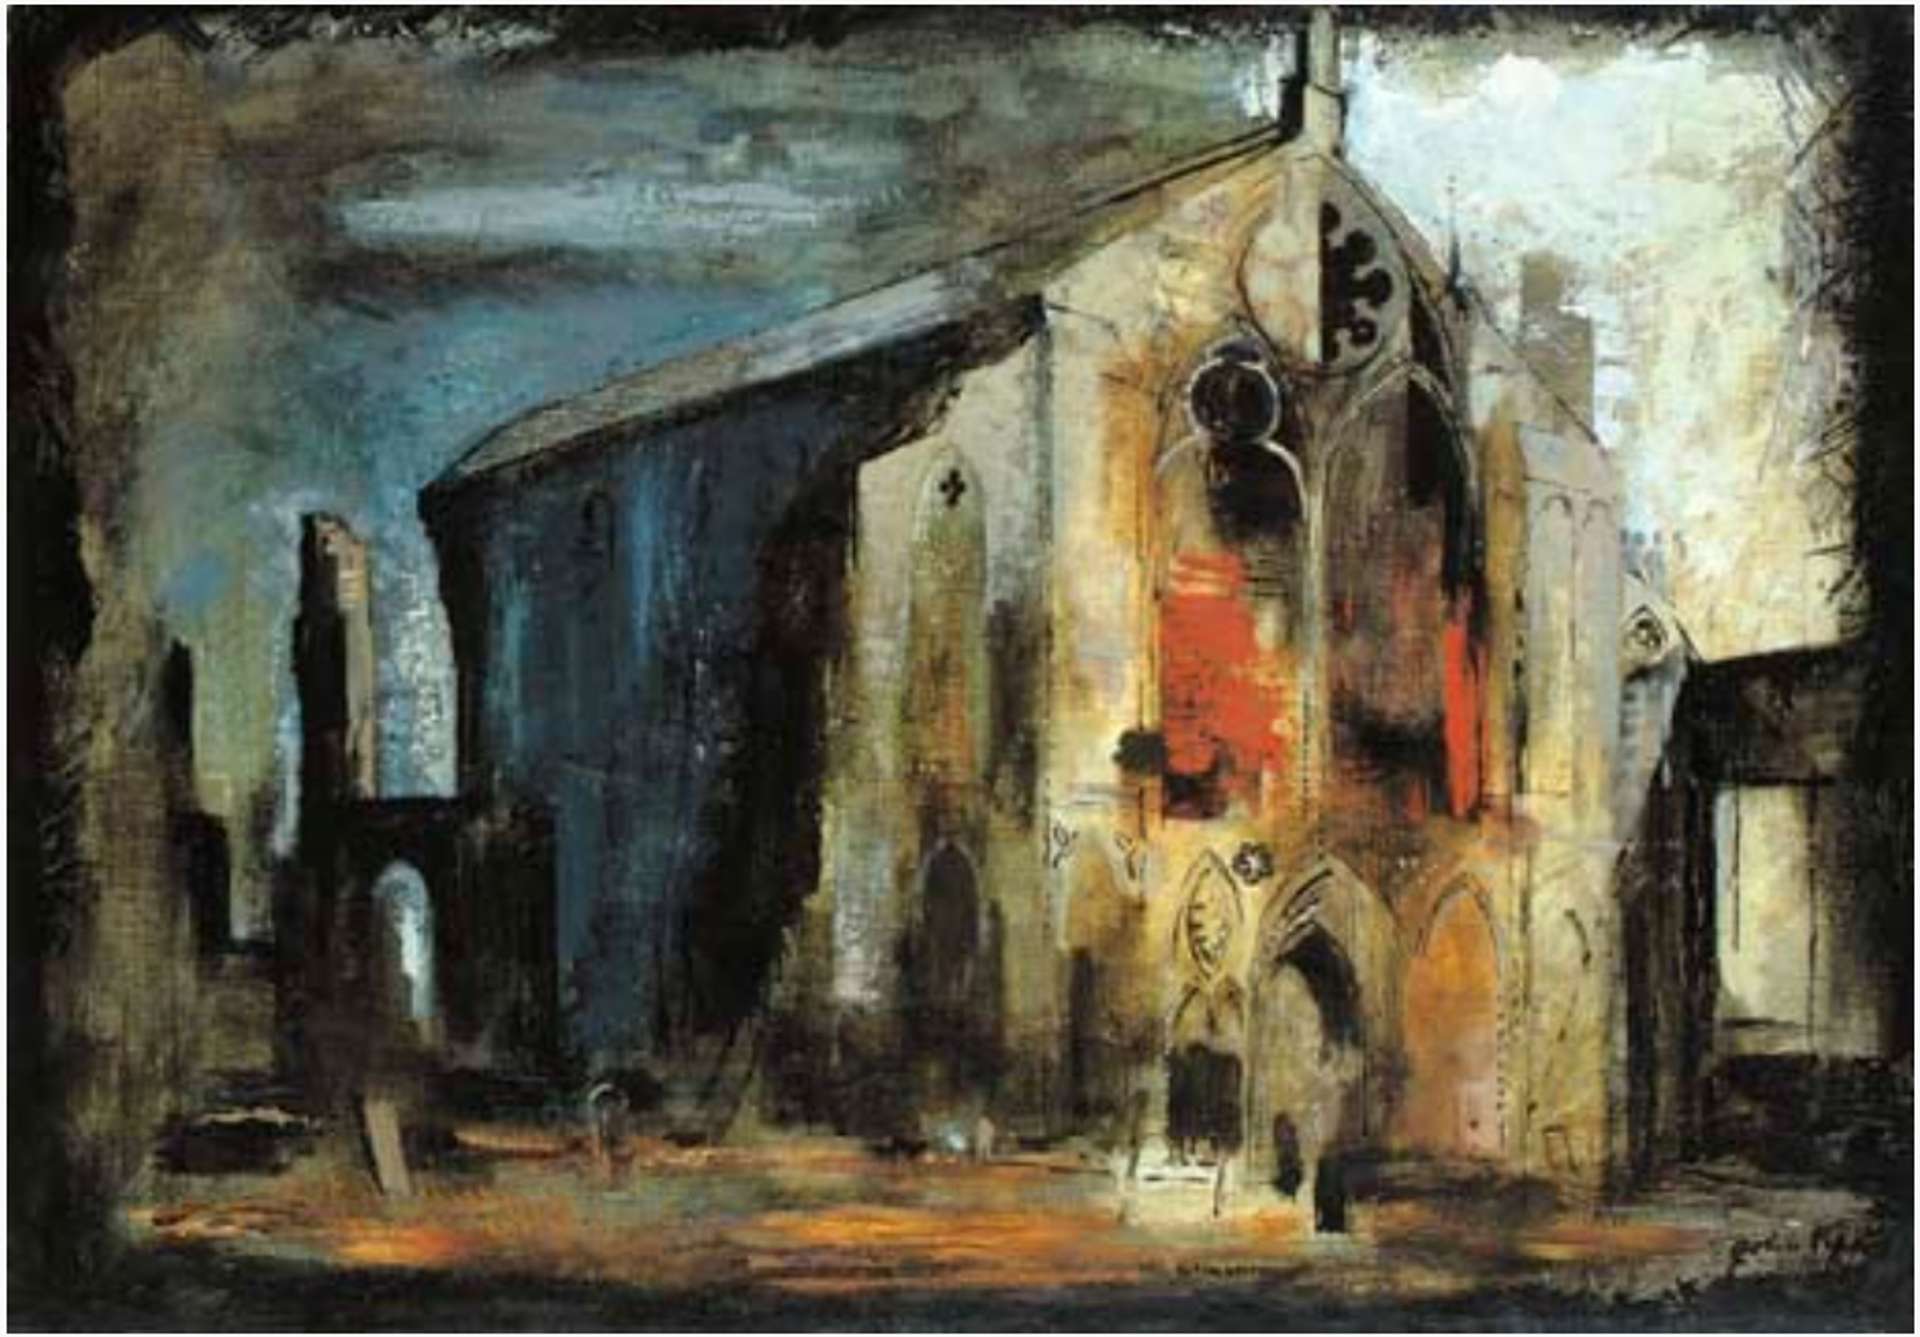 A semi-abstract figurative representation of a church with blended shades of colour, evoking an eerie sense of the church being on fire, created in the post-war period.